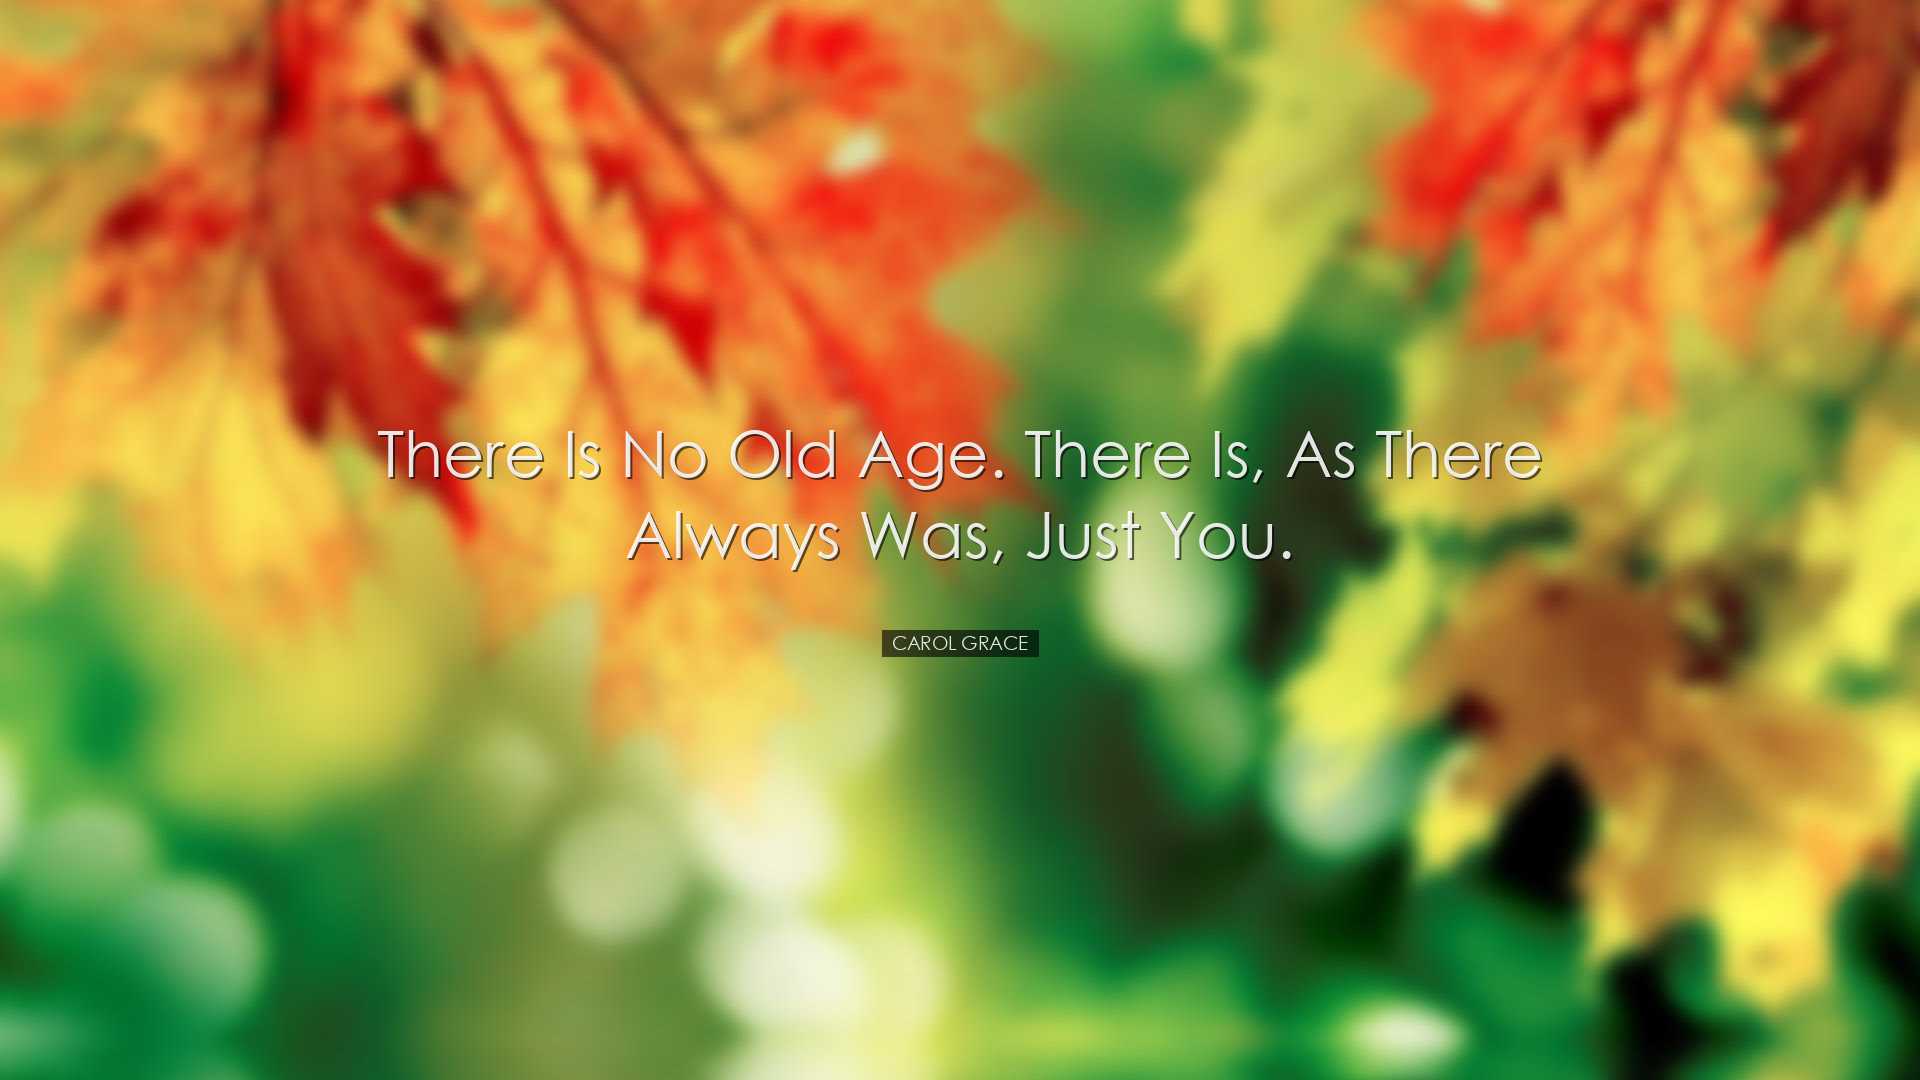 There is no old age. There is, as there always was, just you. - Ca